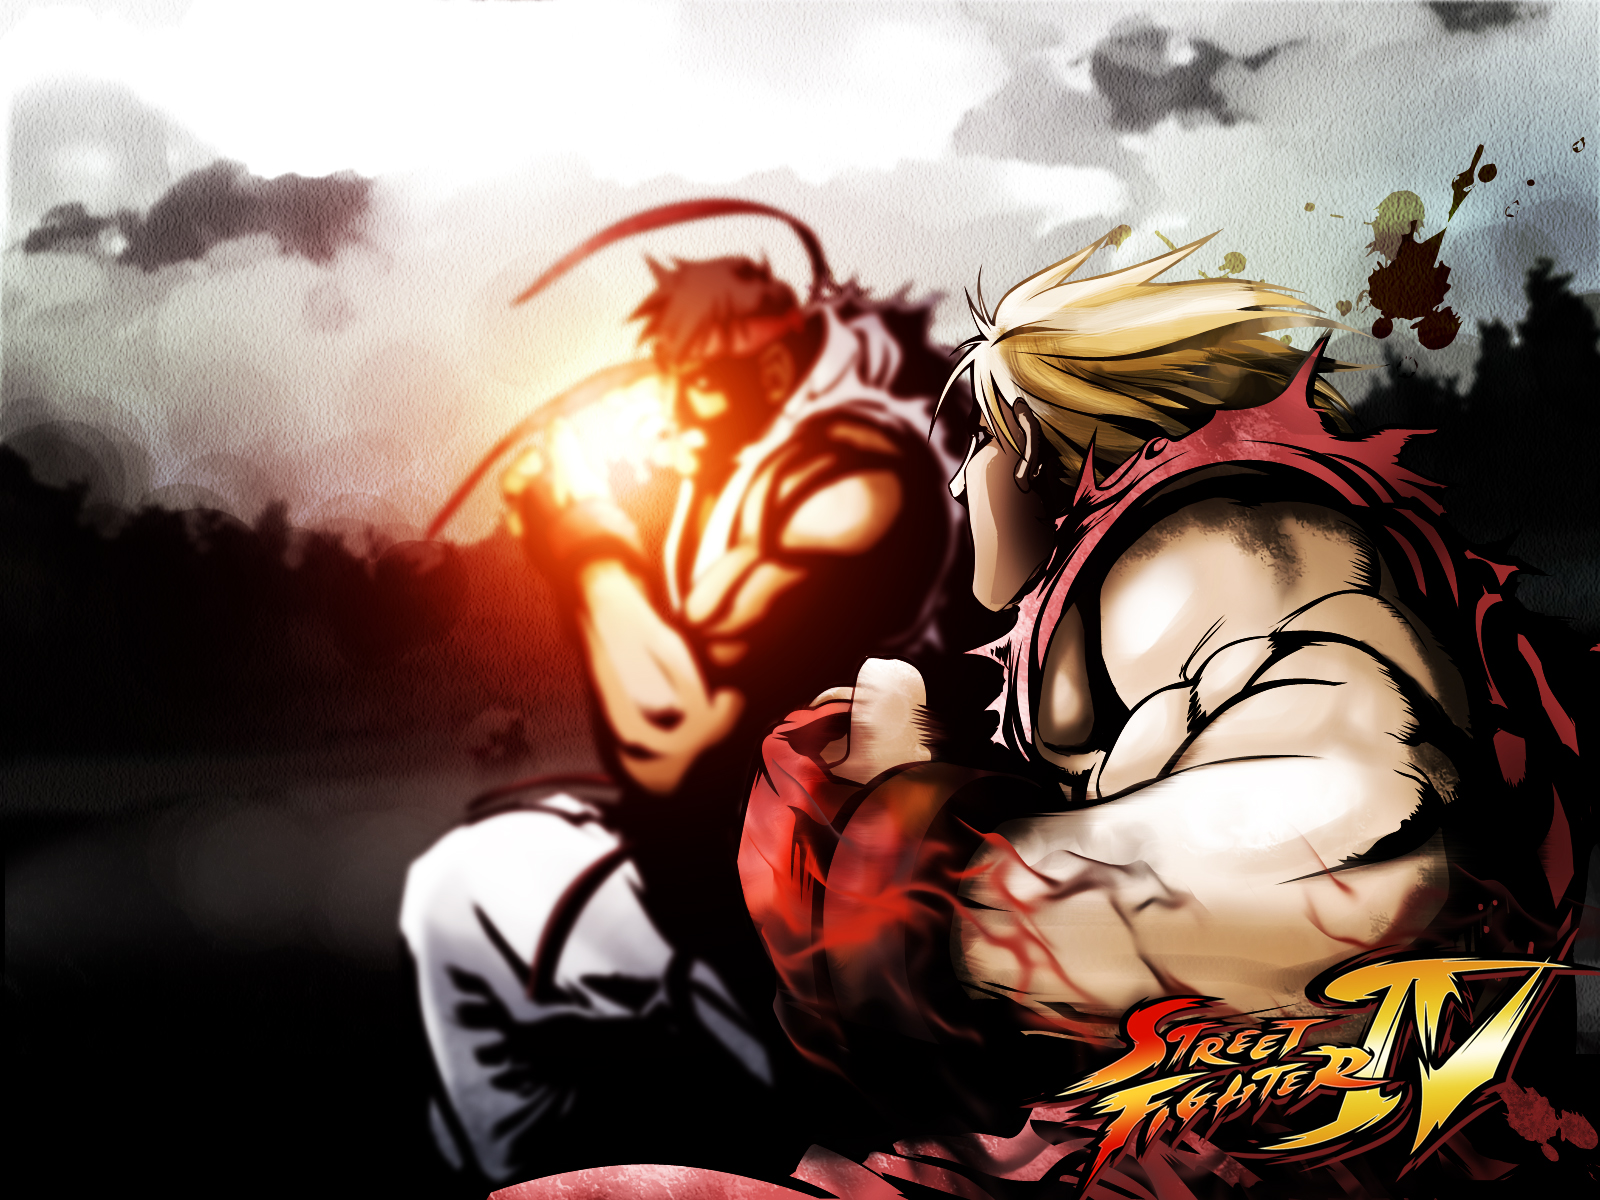 street fighter, video game lock screen backgrounds